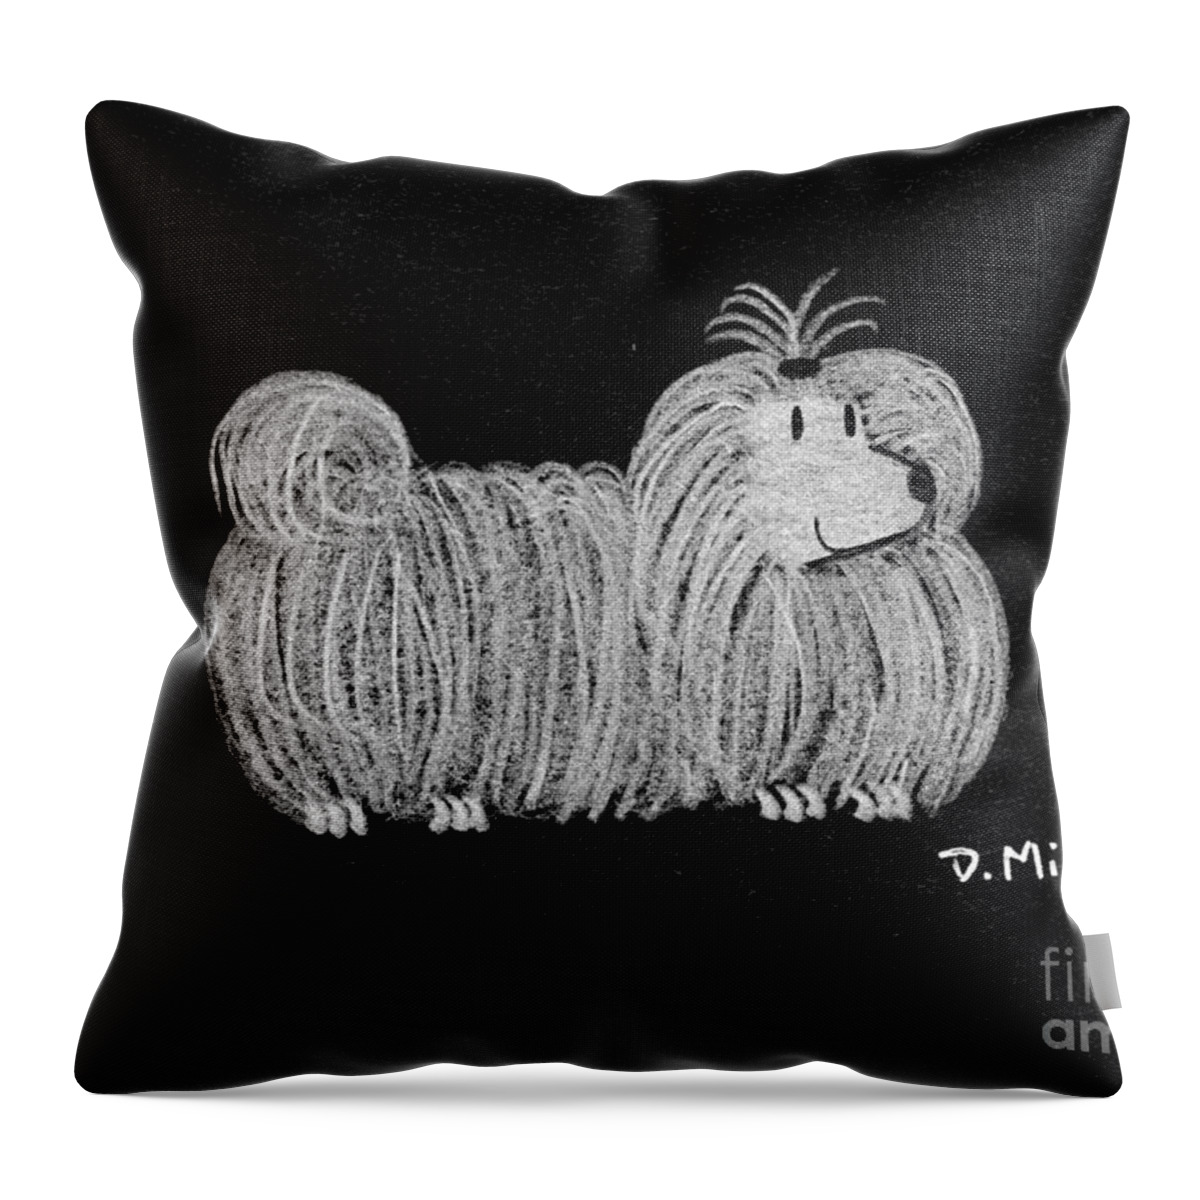 White Dog Throw Pillow featuring the drawing White Dog on Black by Donna Mibus